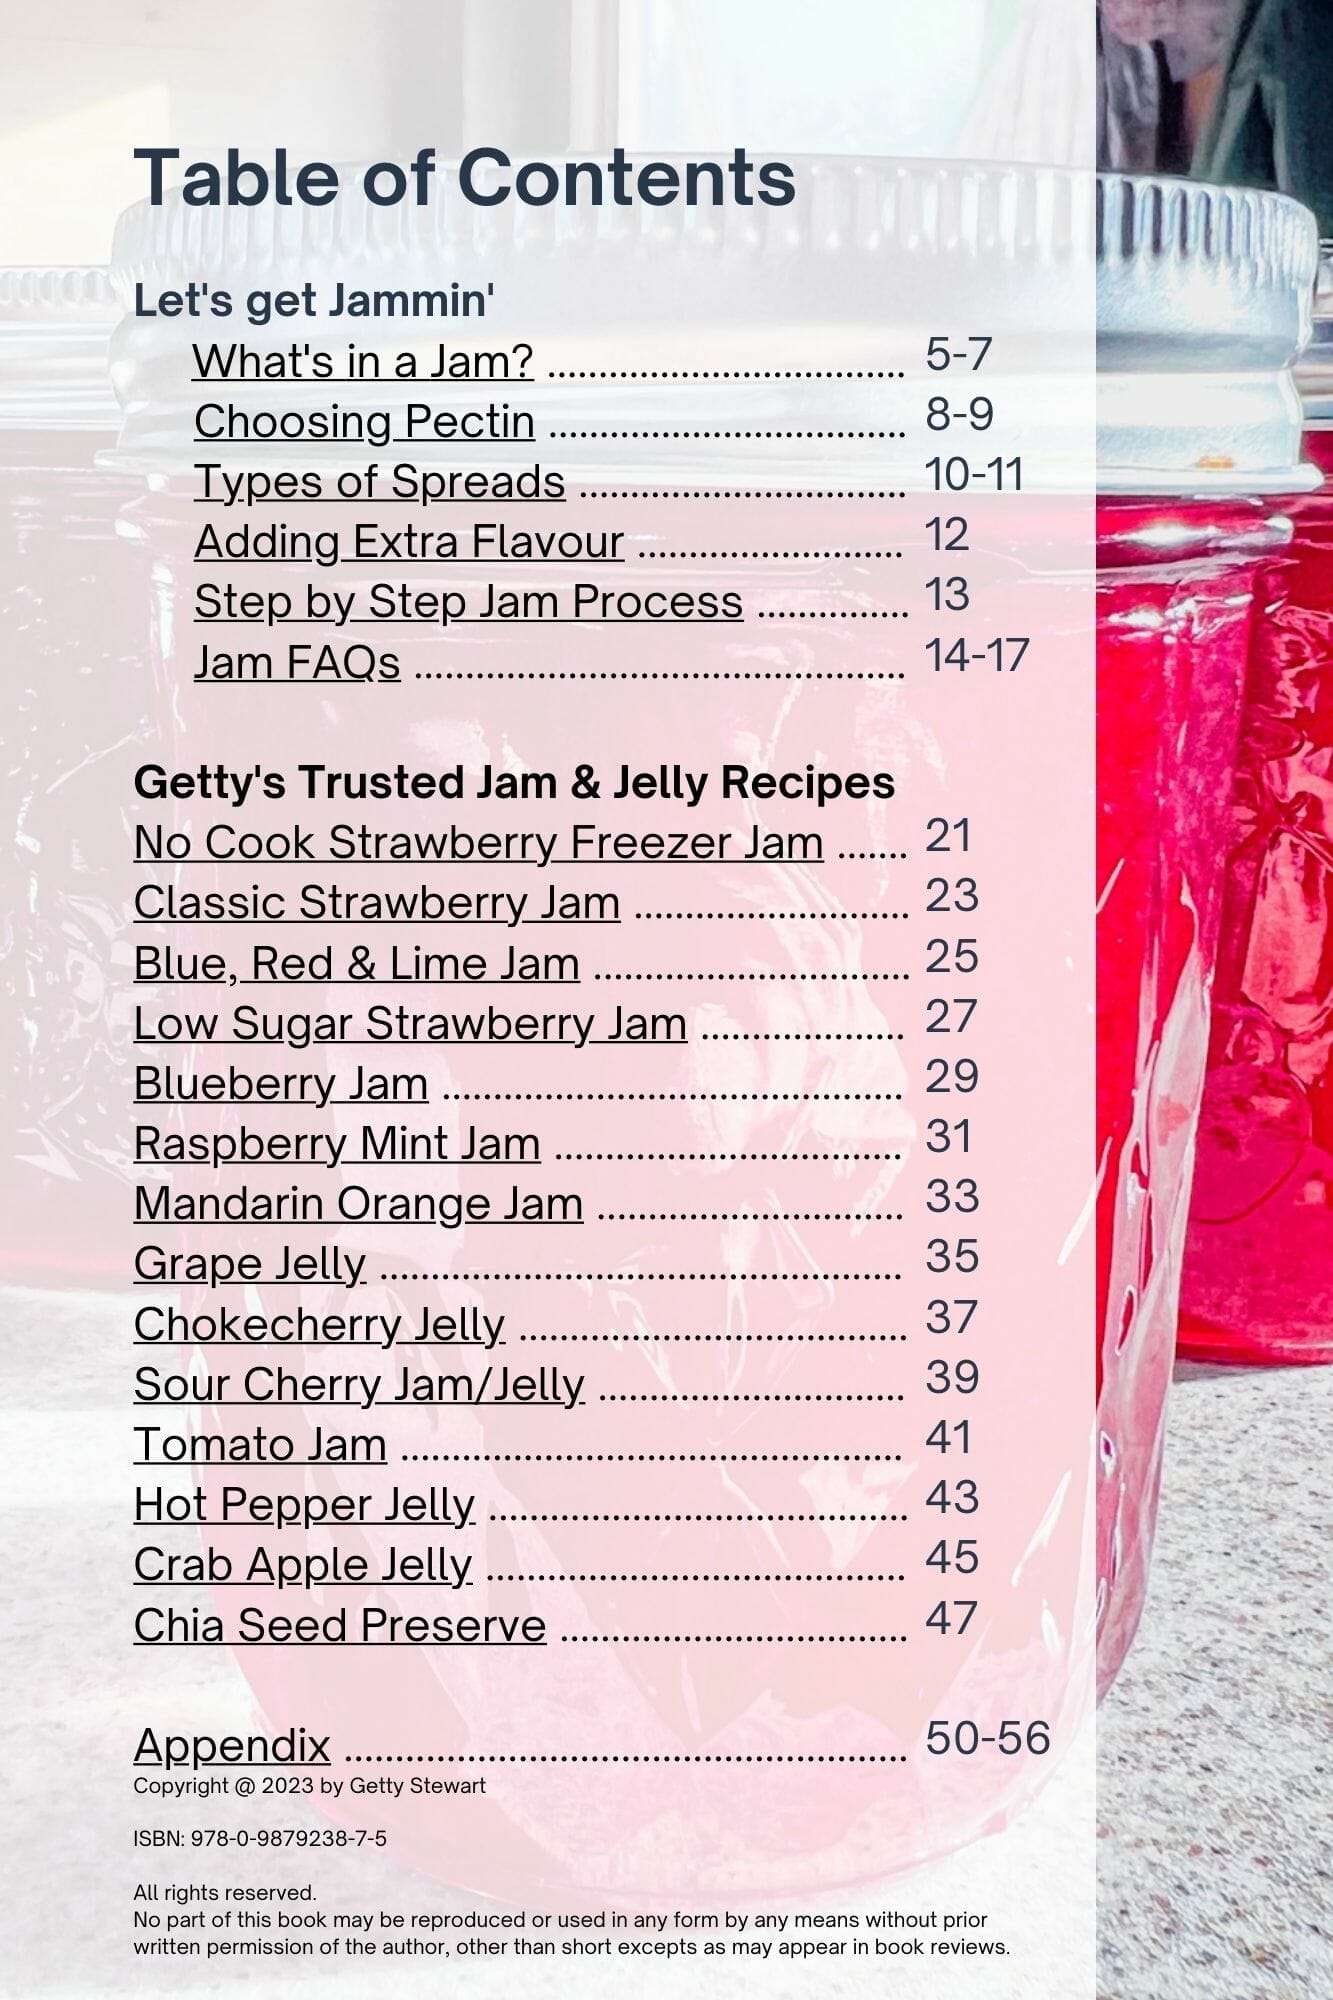 Homemade Jams & Jellies - Table of Contents